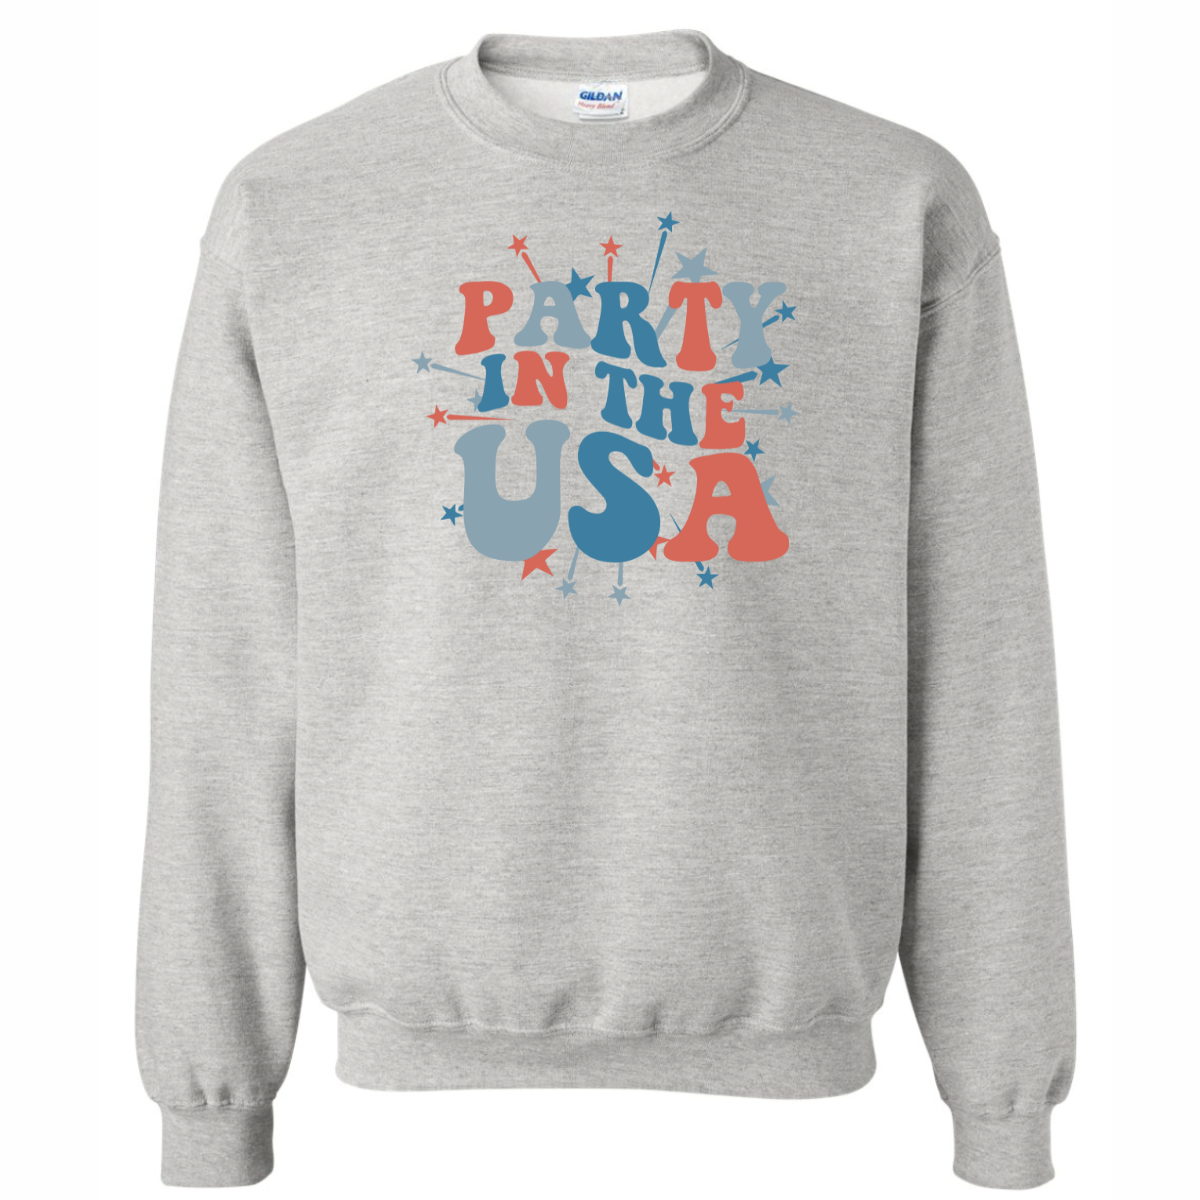 Fourth of July Tops Party in the USA - Premium Printed Apparel